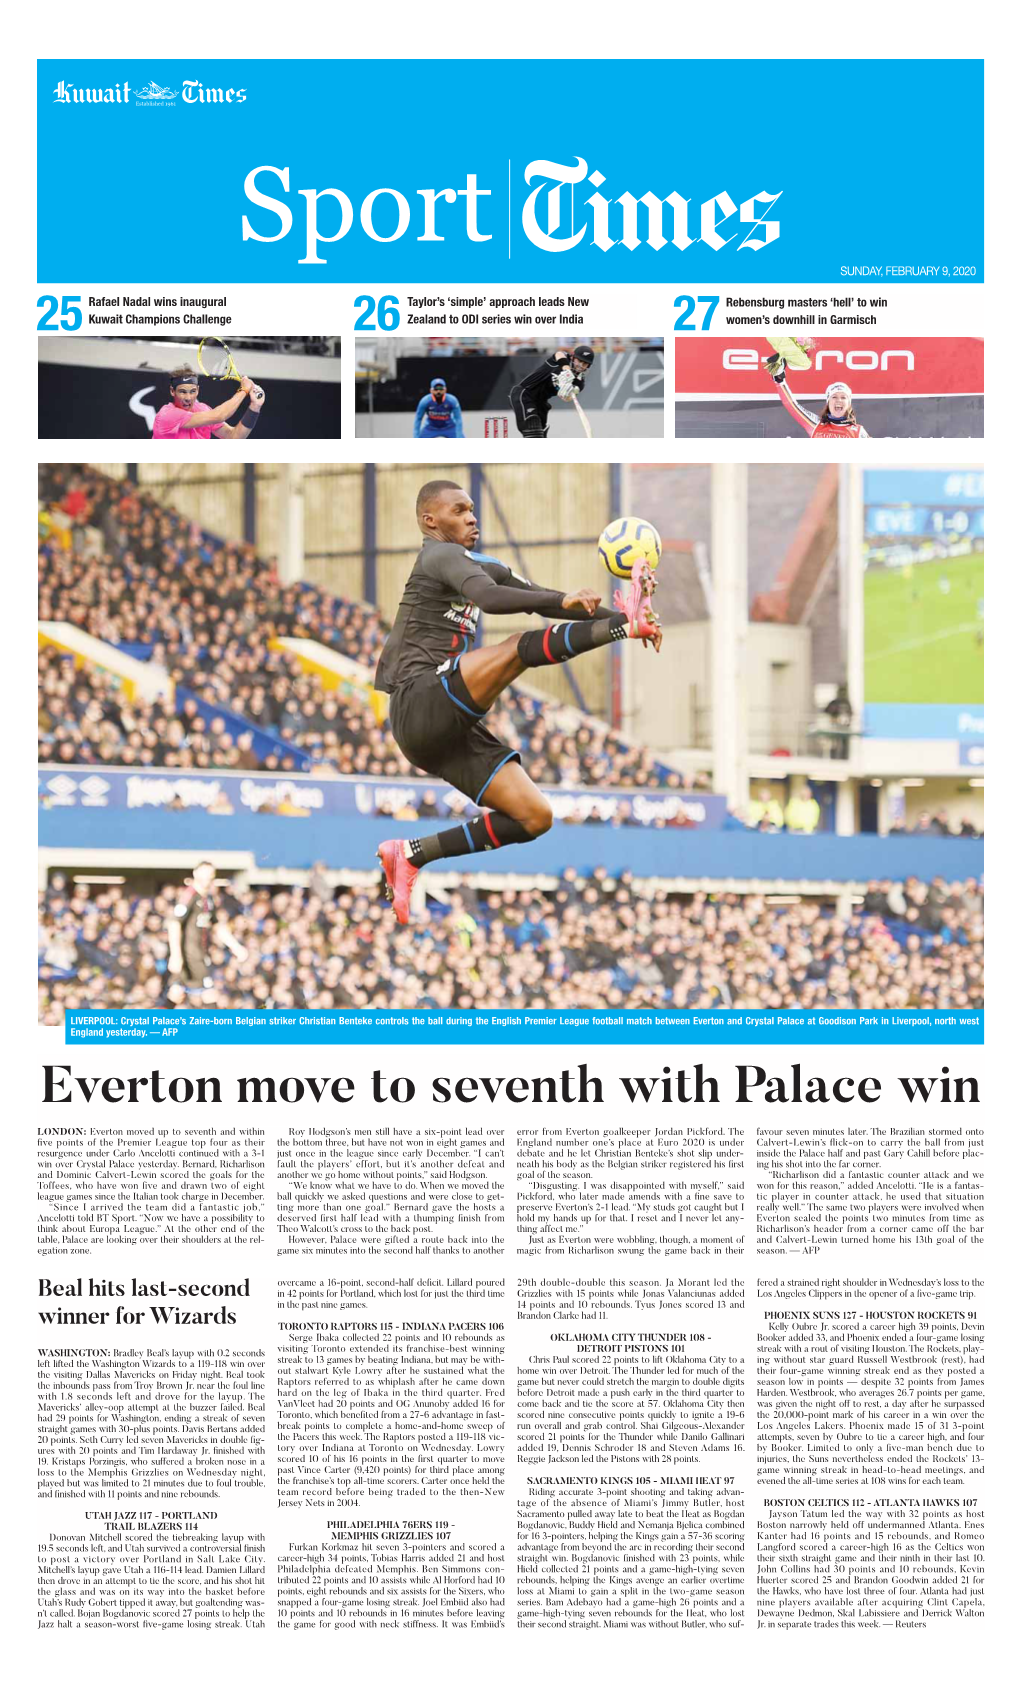 Everton Move to Seventh with Palace Win